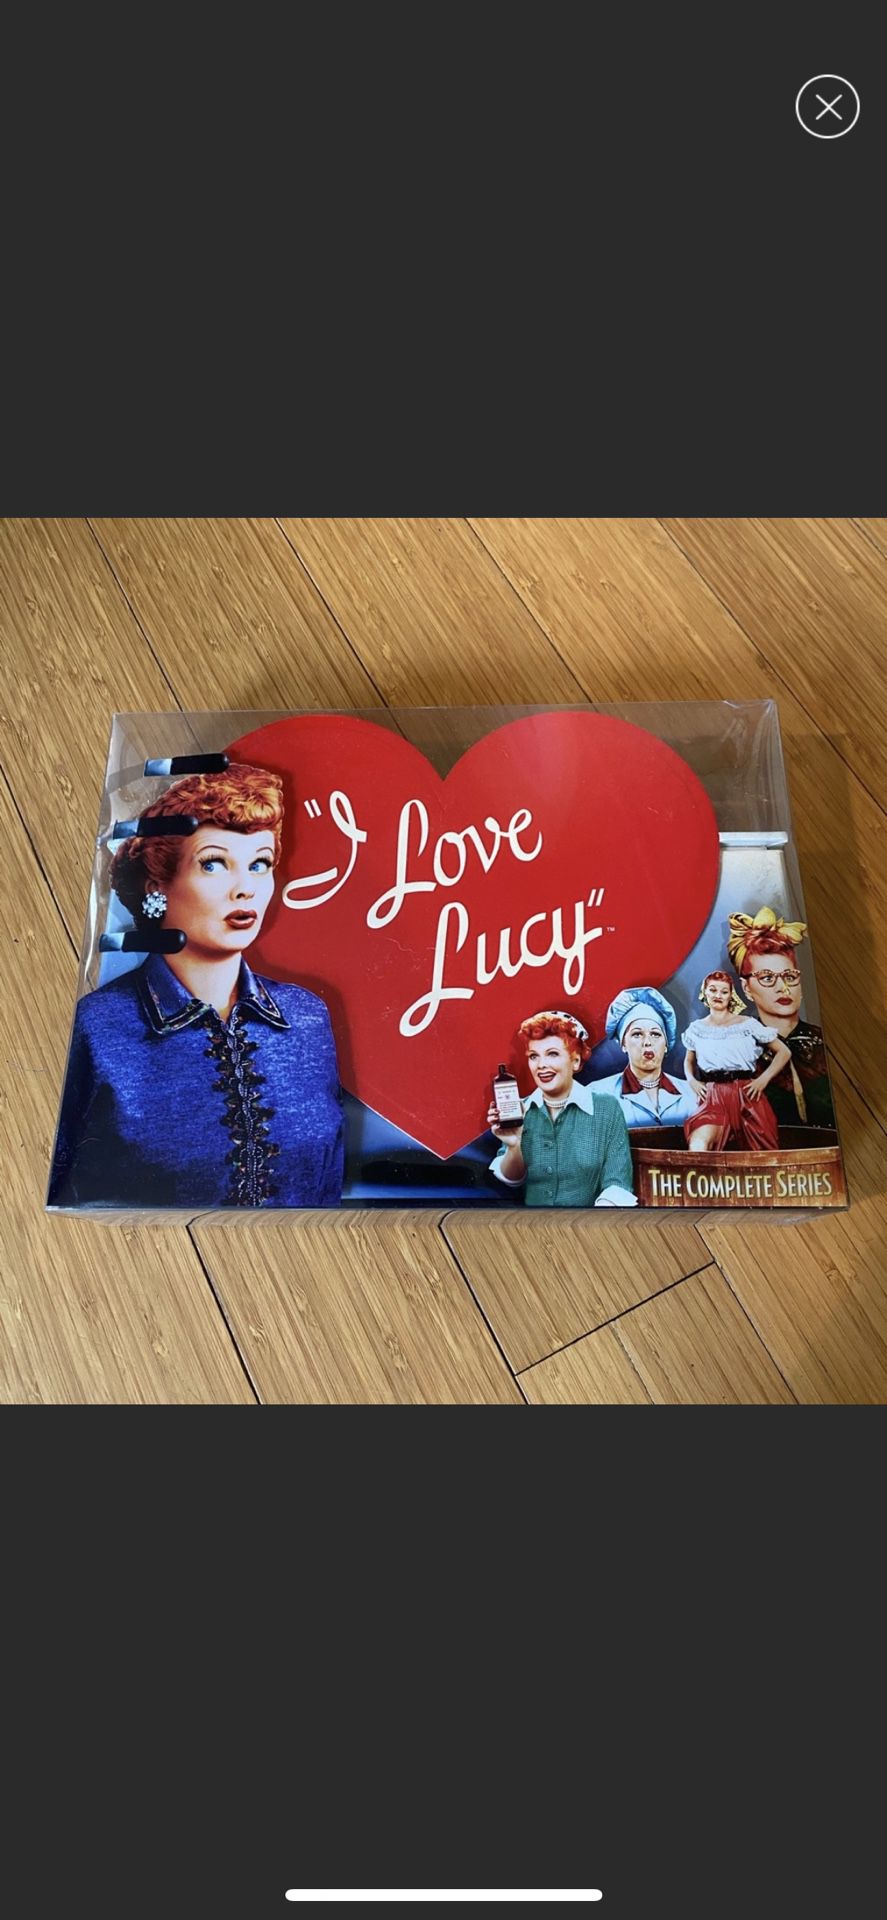 DVD Complete series - “I Love Lucy”